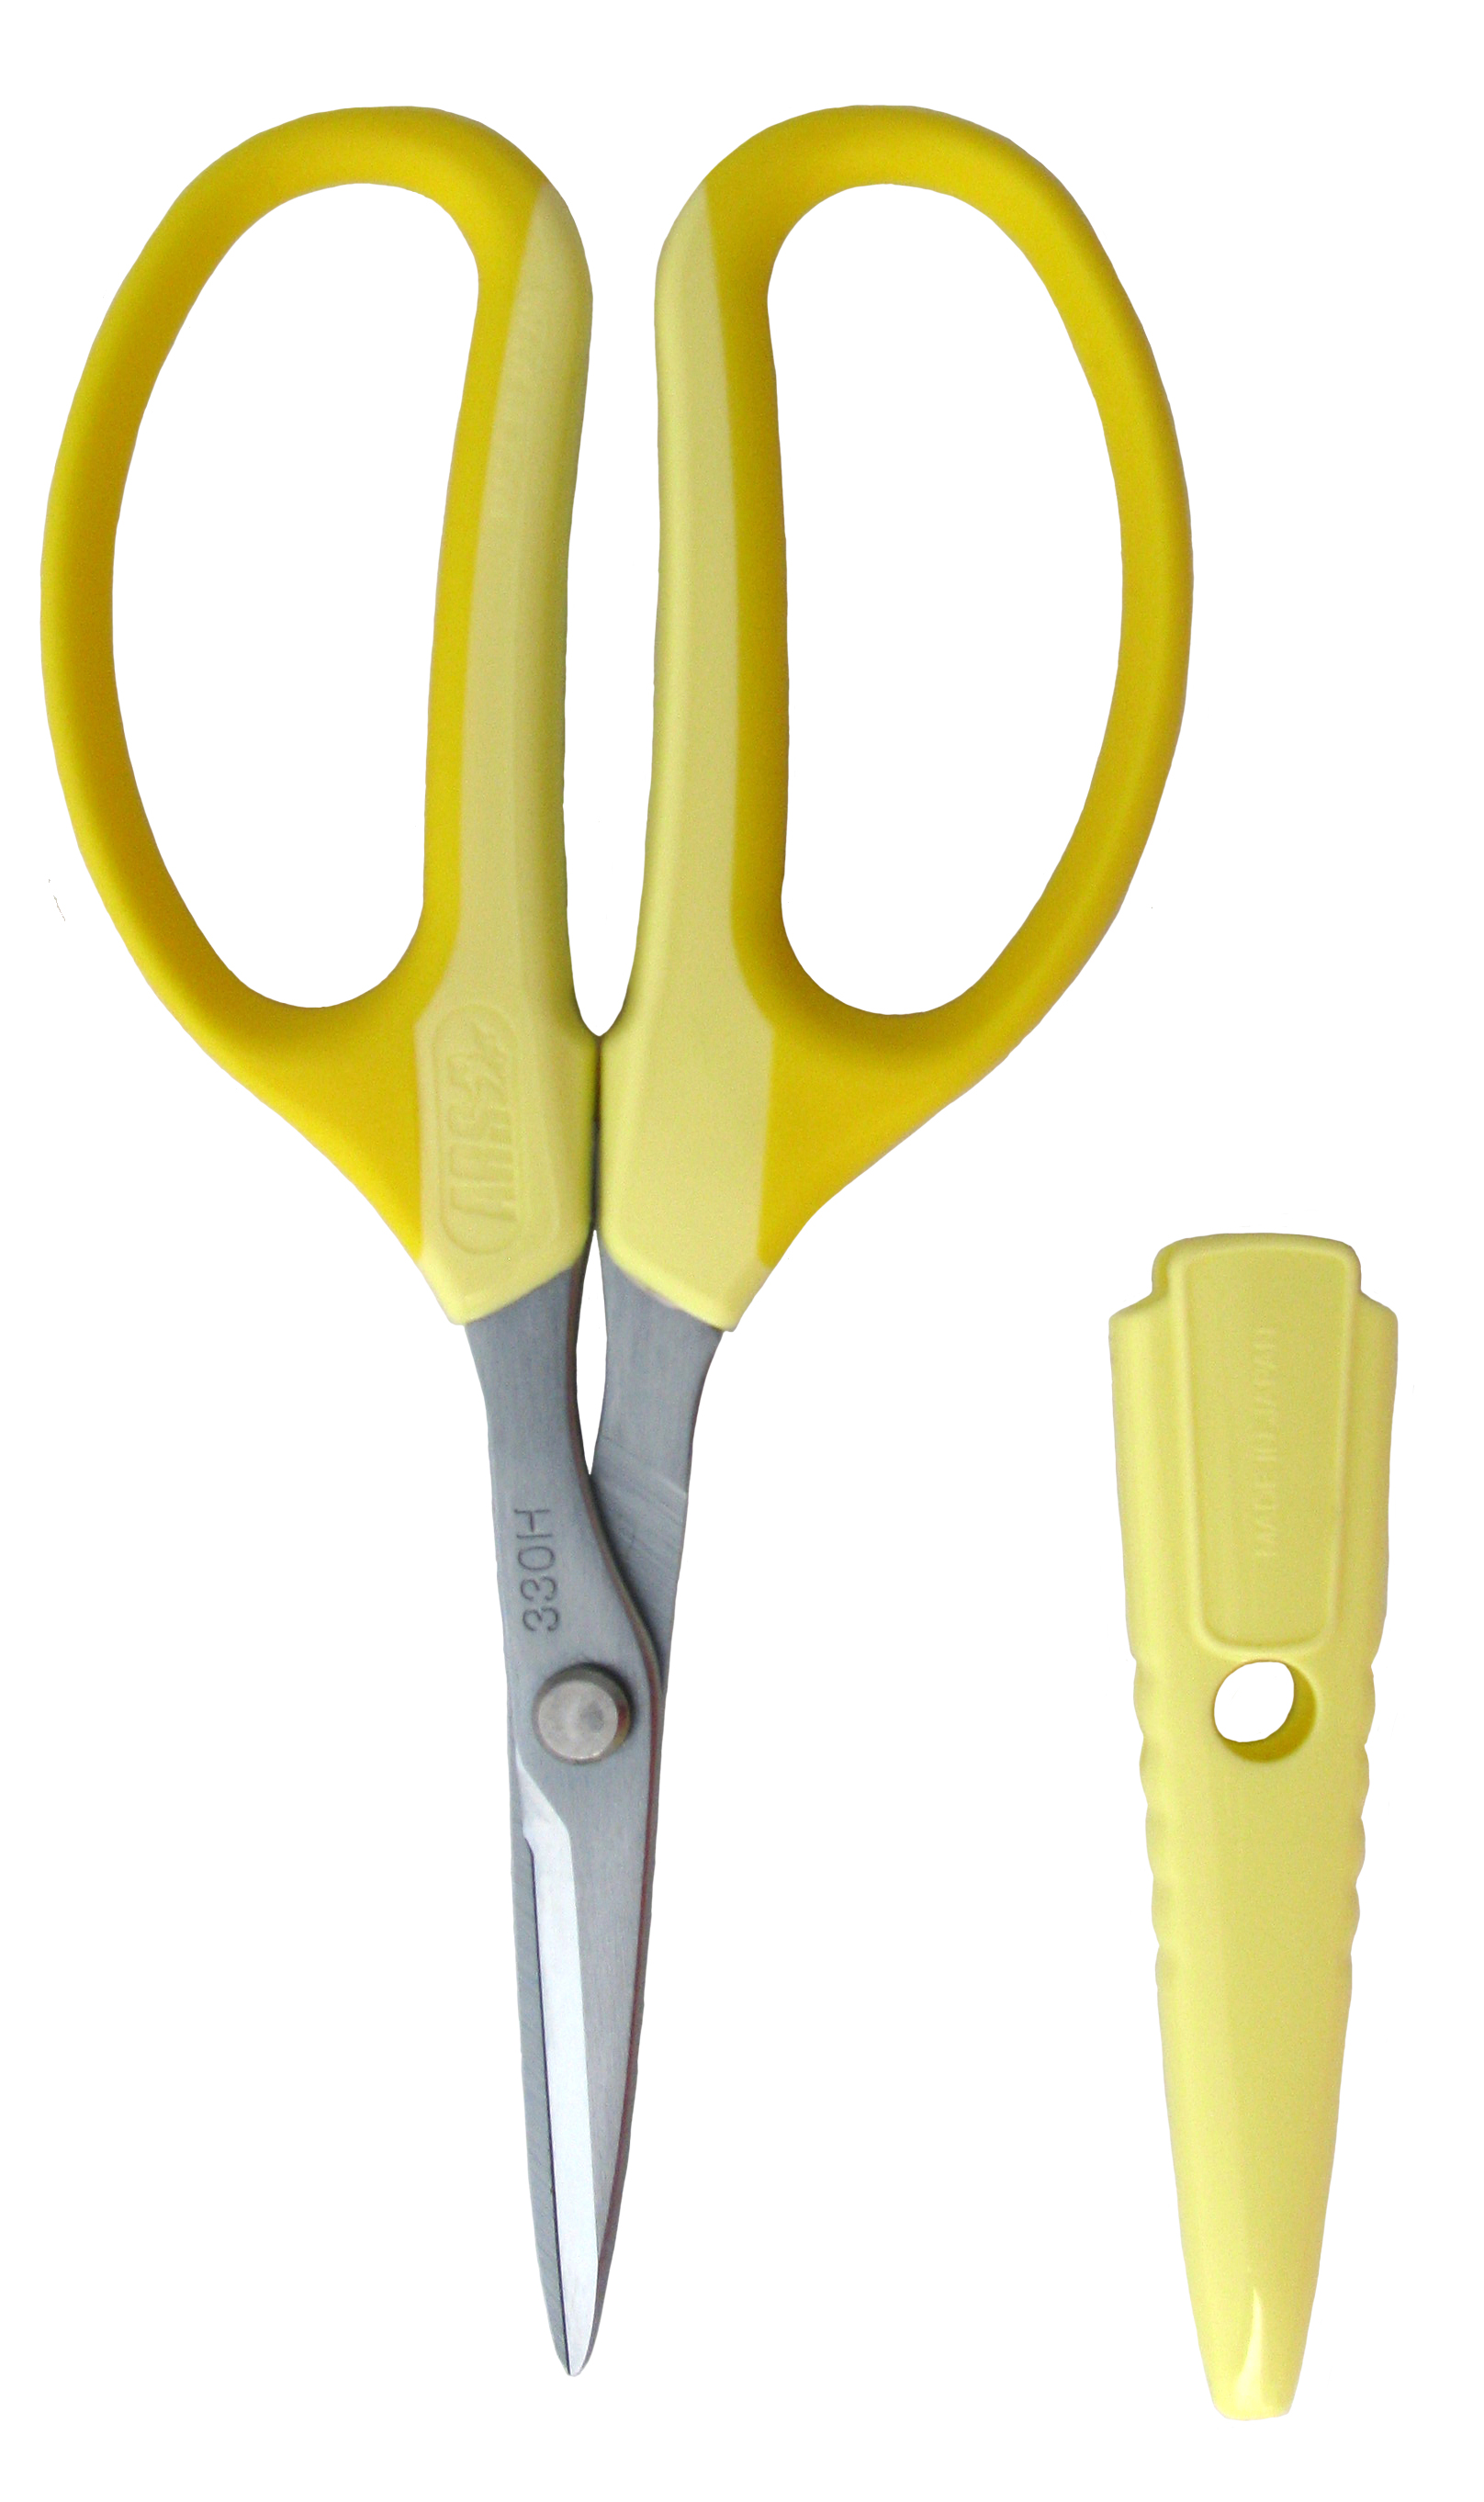 Picture for ARS Signature Scissors with Blade Cap, Yellow